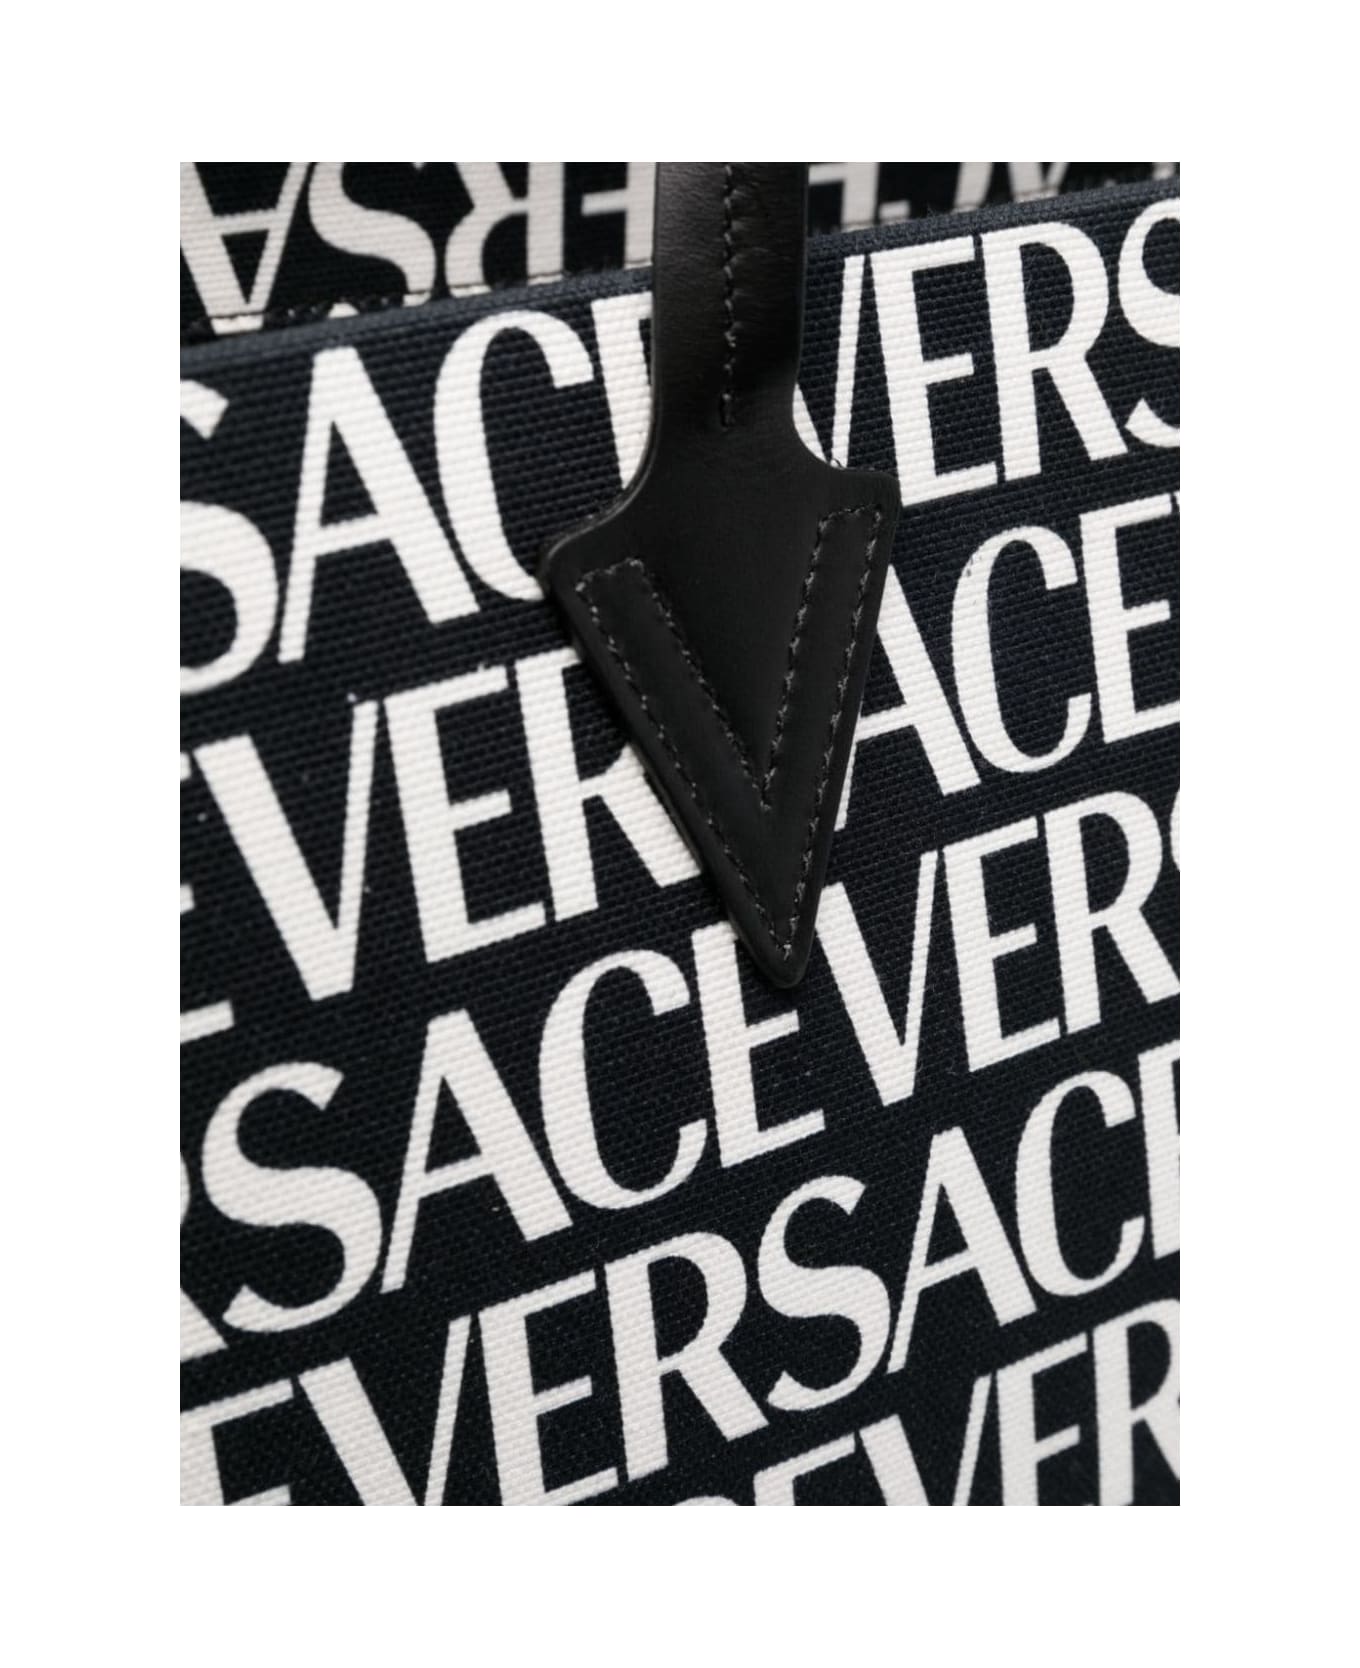 Versace Repeat Tote Bag With All-over Logo Print In Black Canvas Woman - Black